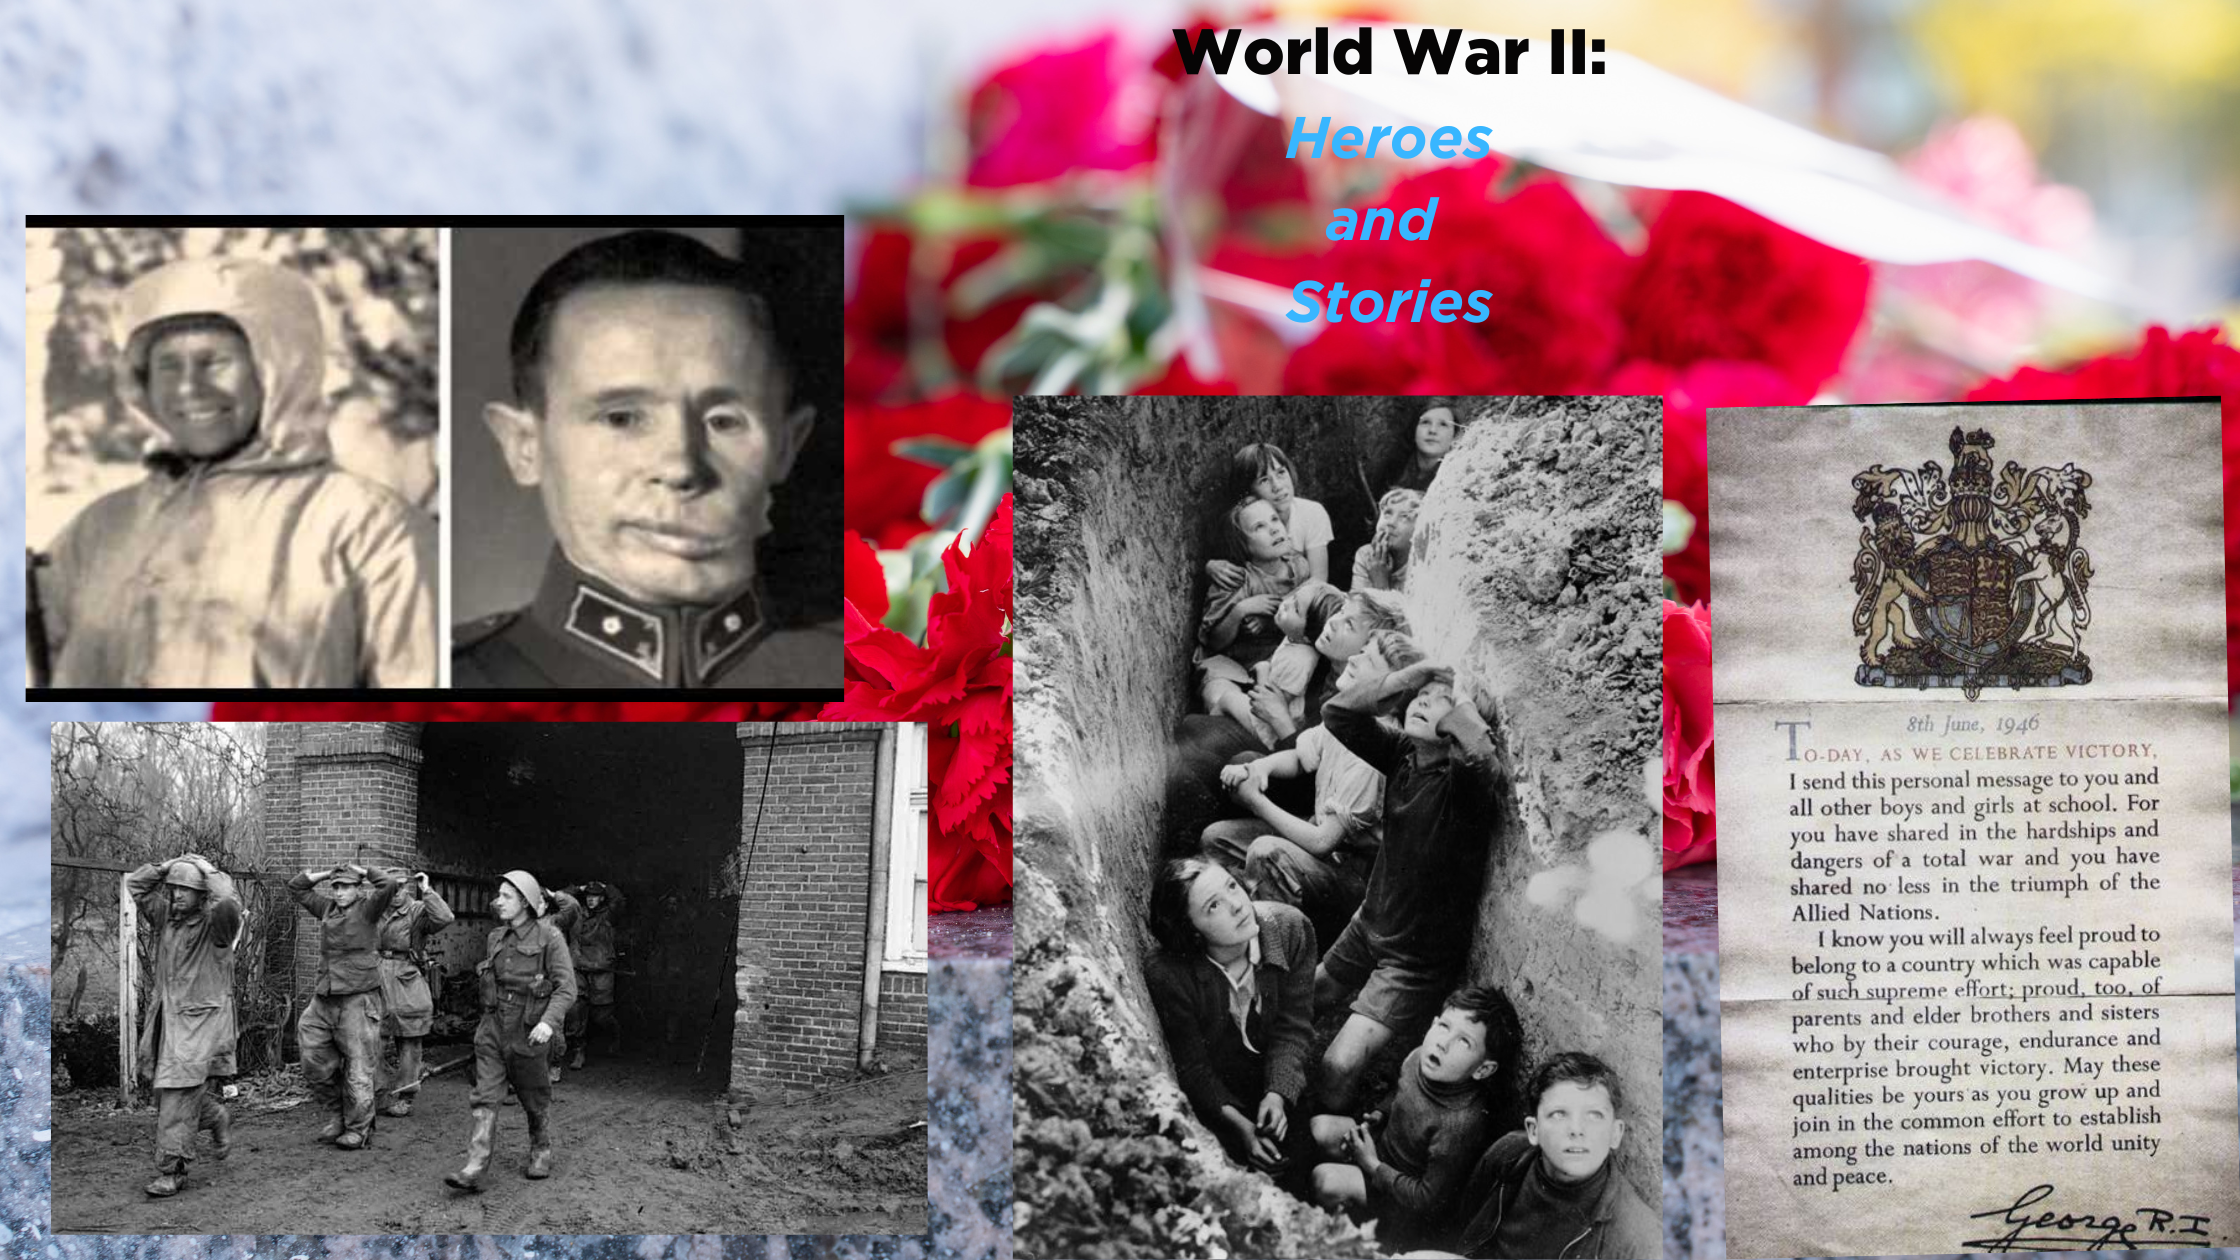 World War II: Heroes and Stories